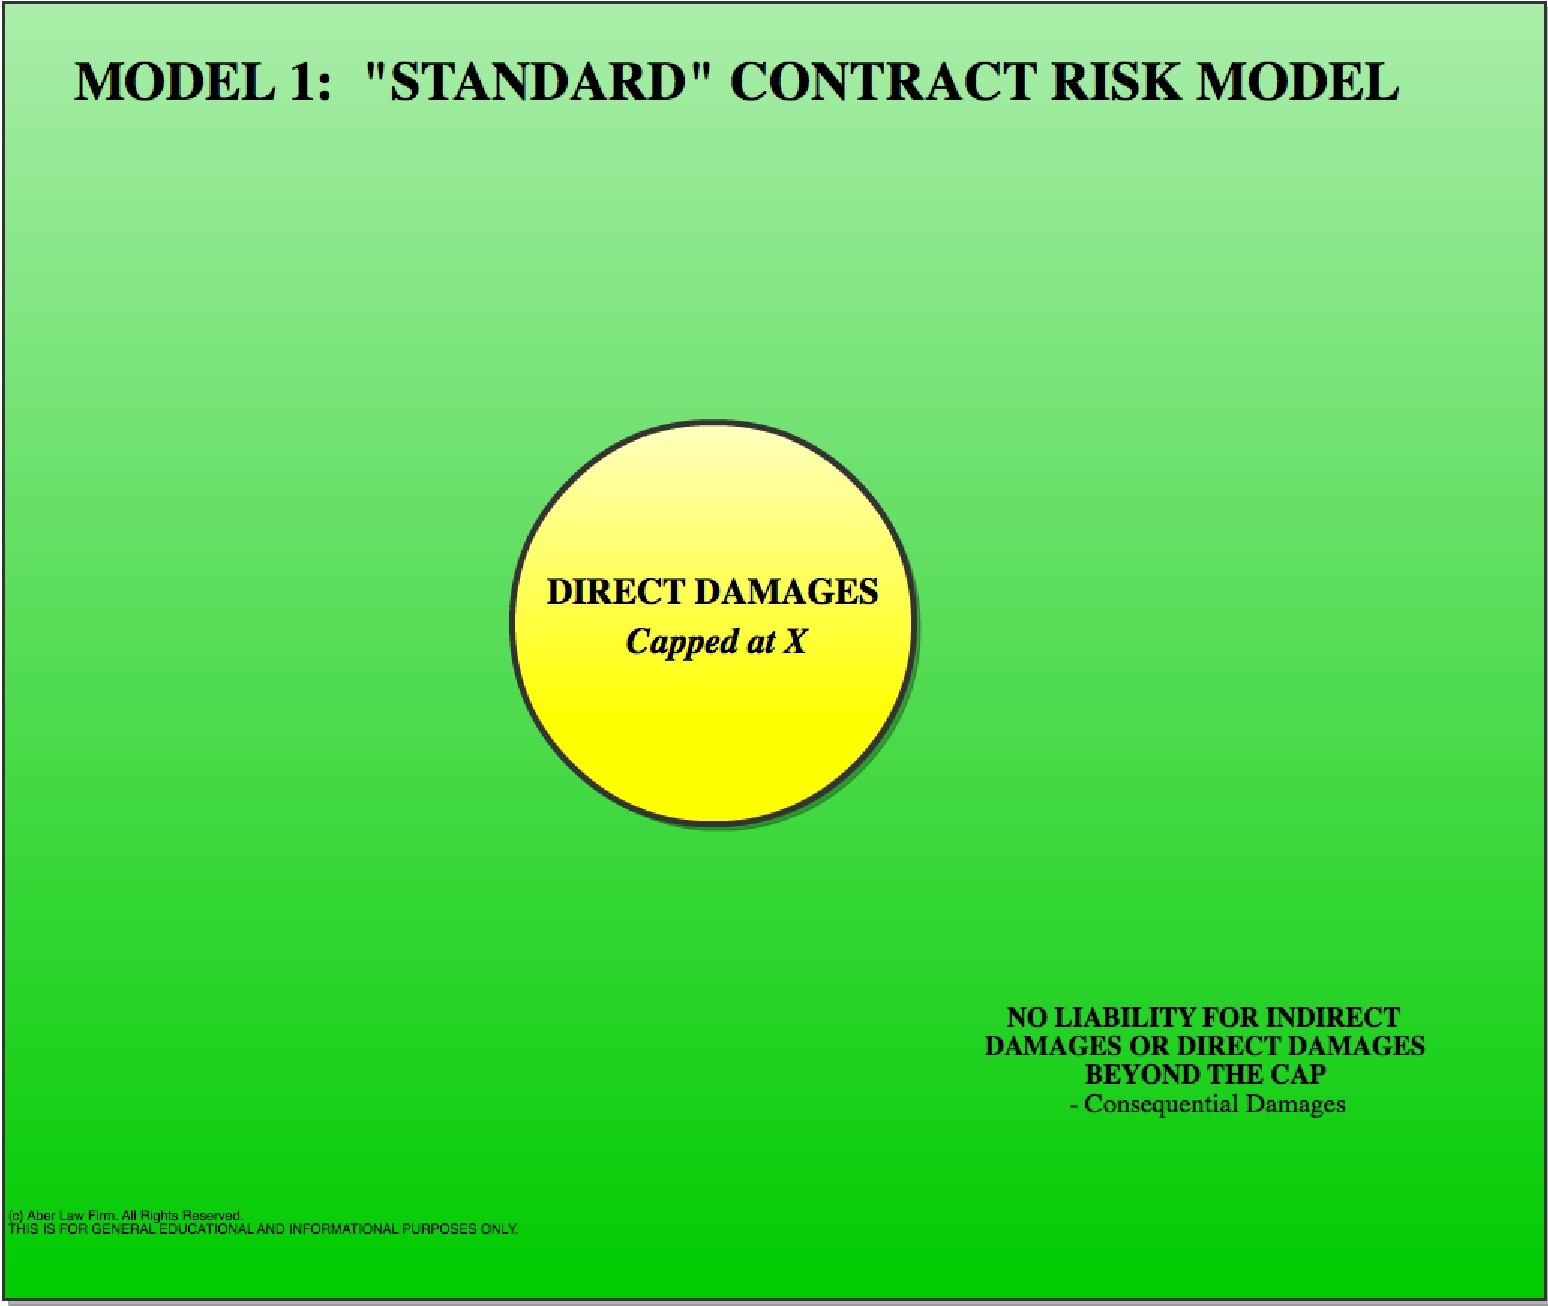 SaaS Agreement Liability Model 2 "Standard" Contract Risk Model Chart - Aber Law Firm